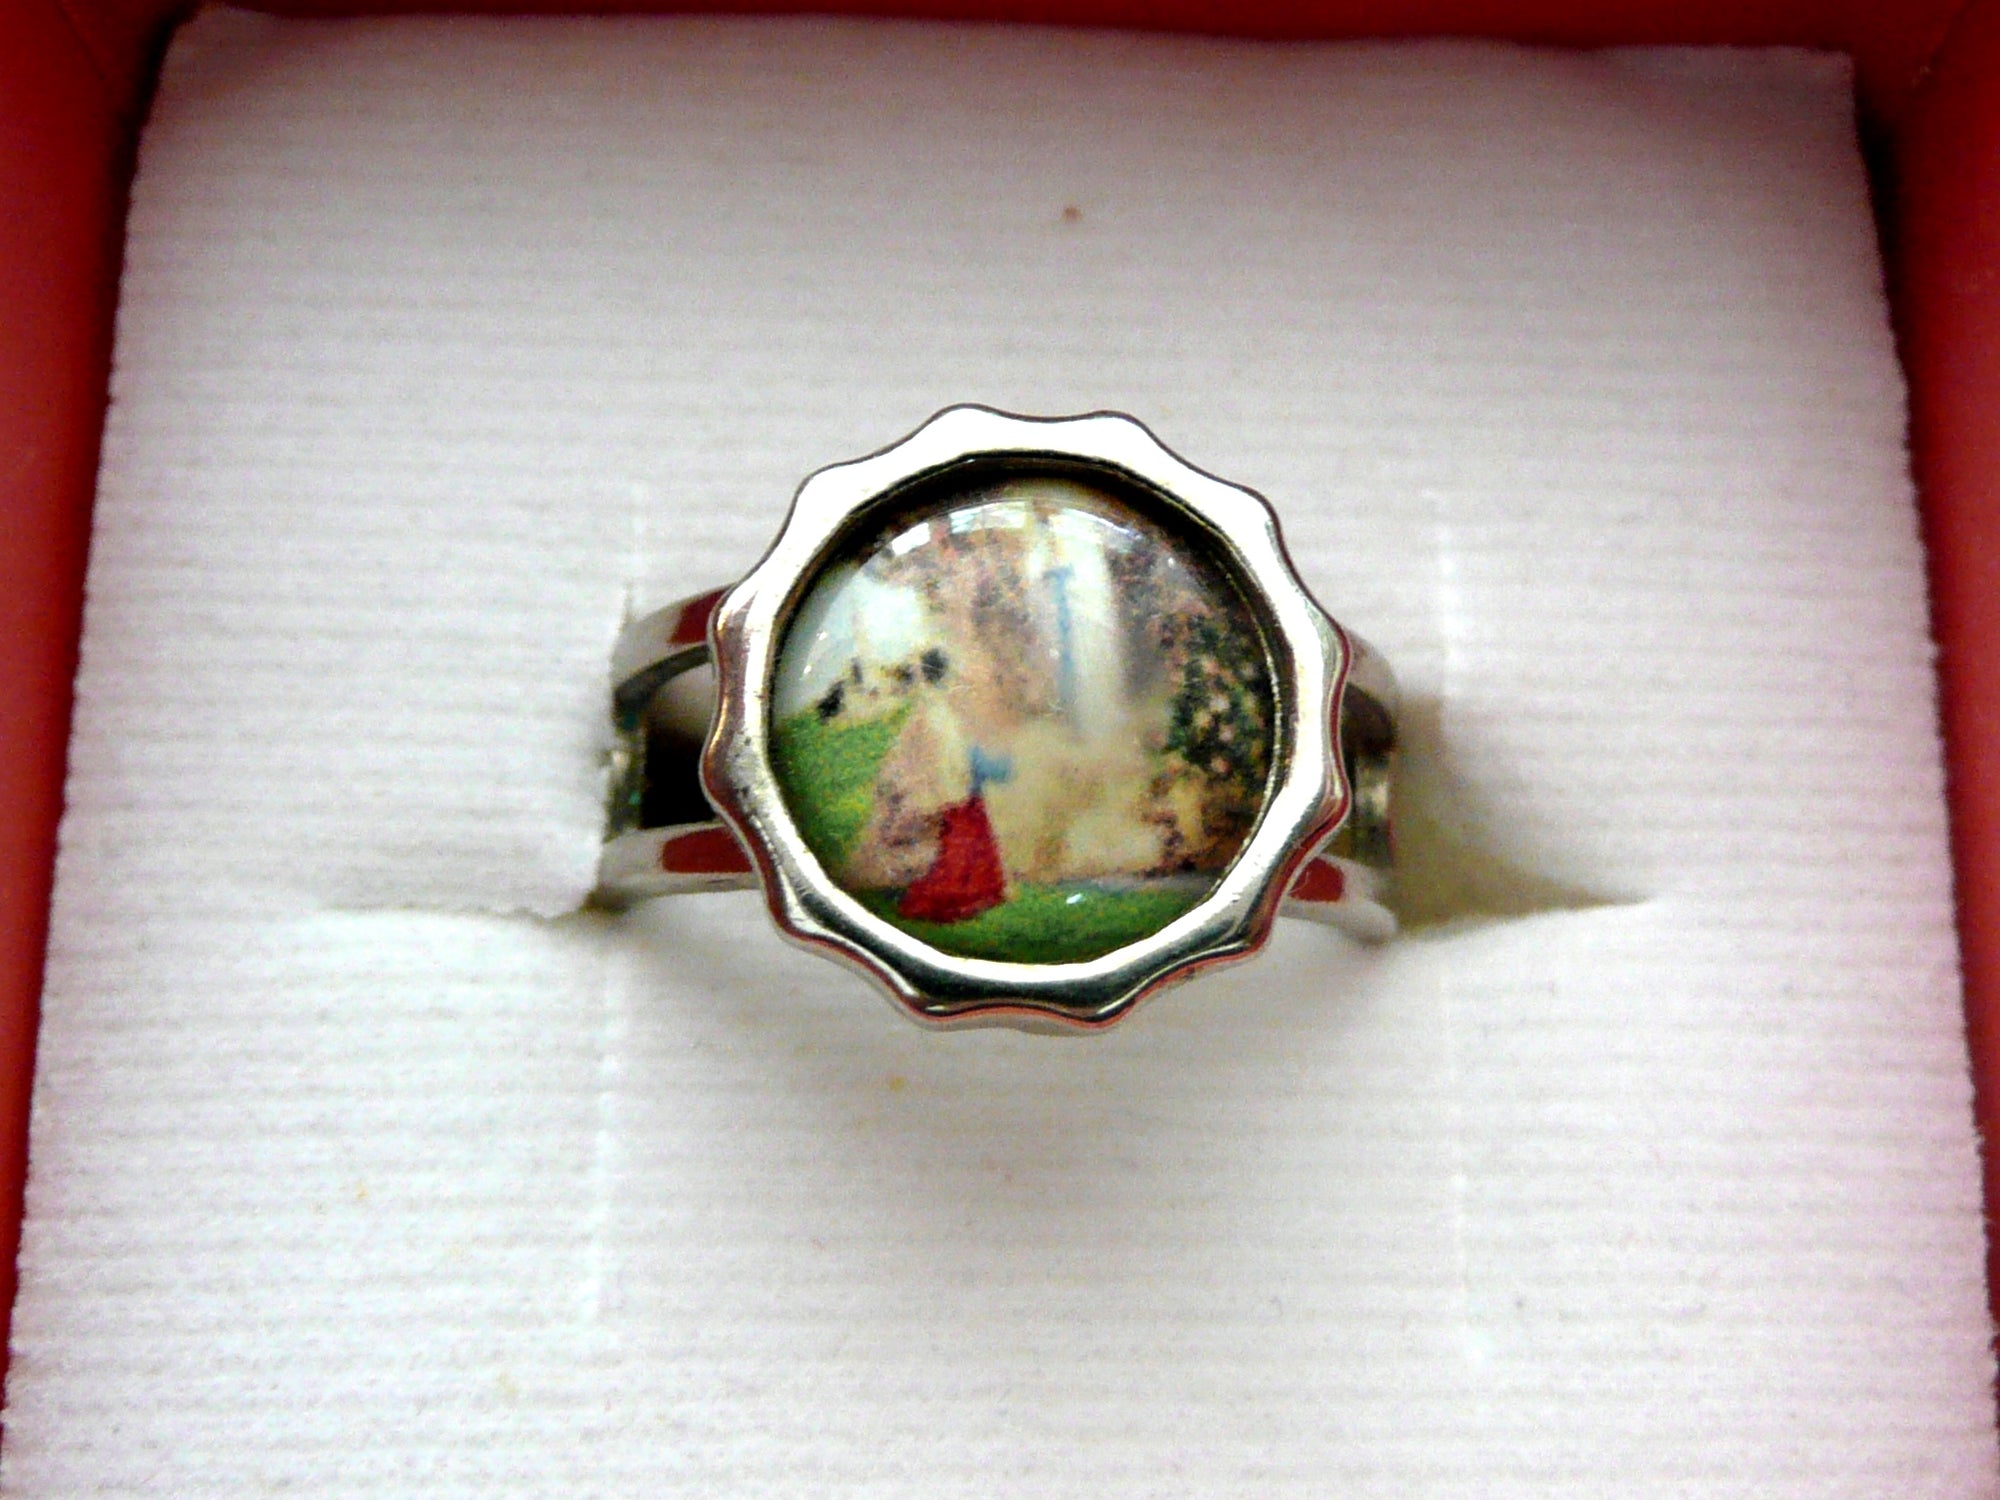 Vintage French Adjustable Our Lady of Lourdes Ring